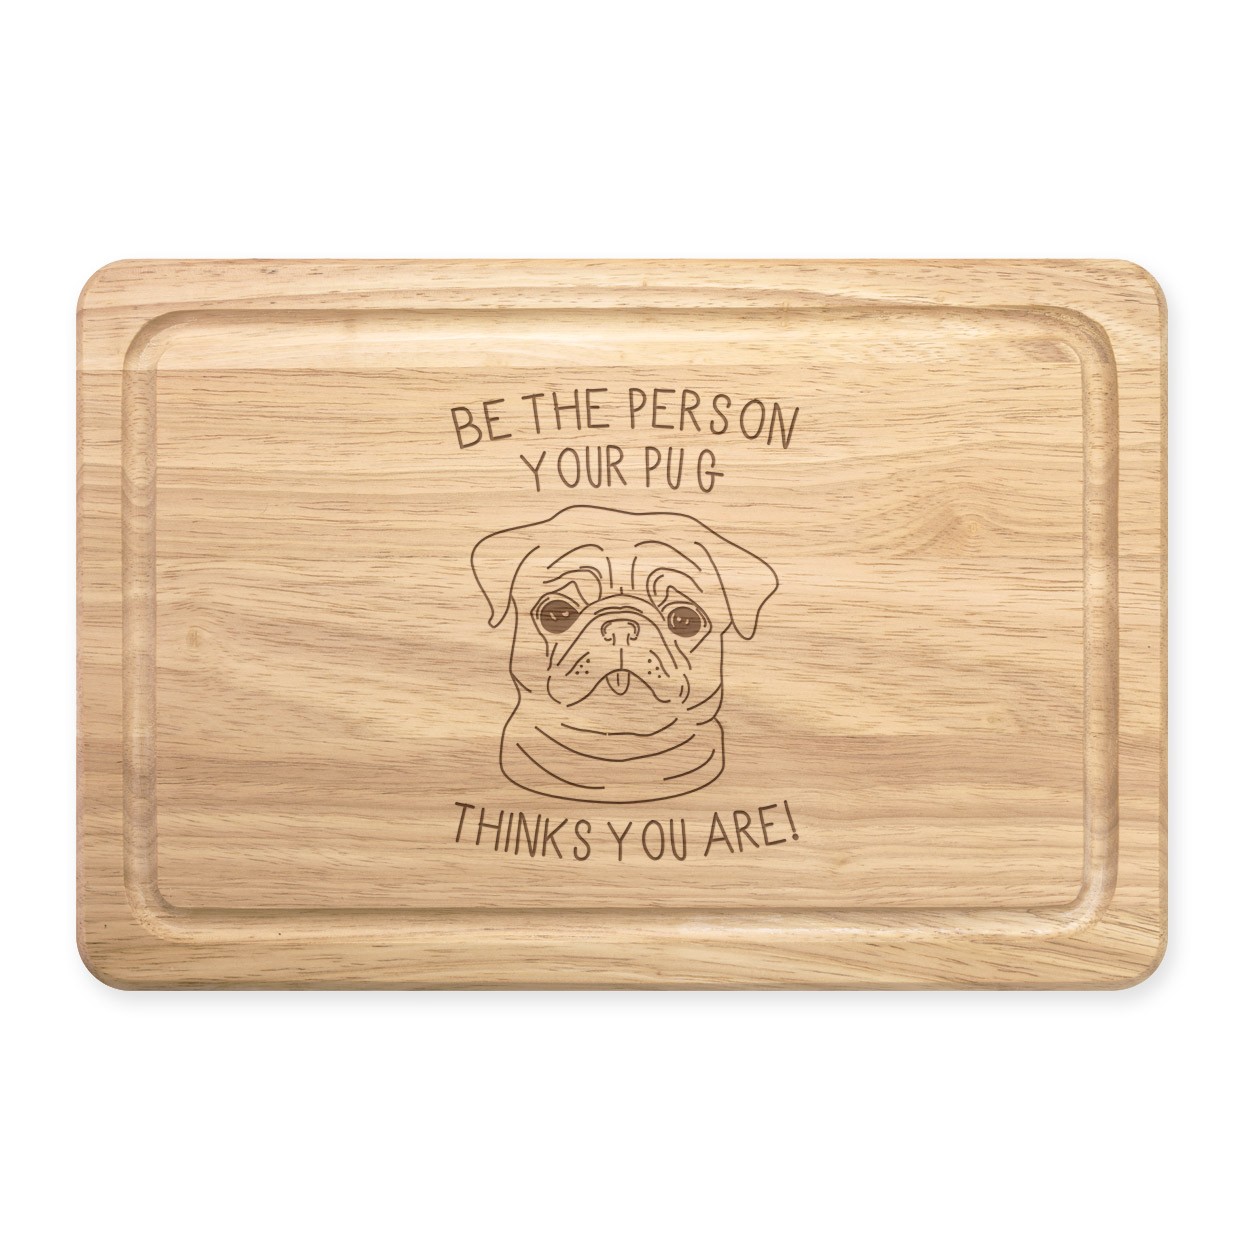 Be The Person Your Pug Thinks You Are Rectangular Wooden Chopping Board